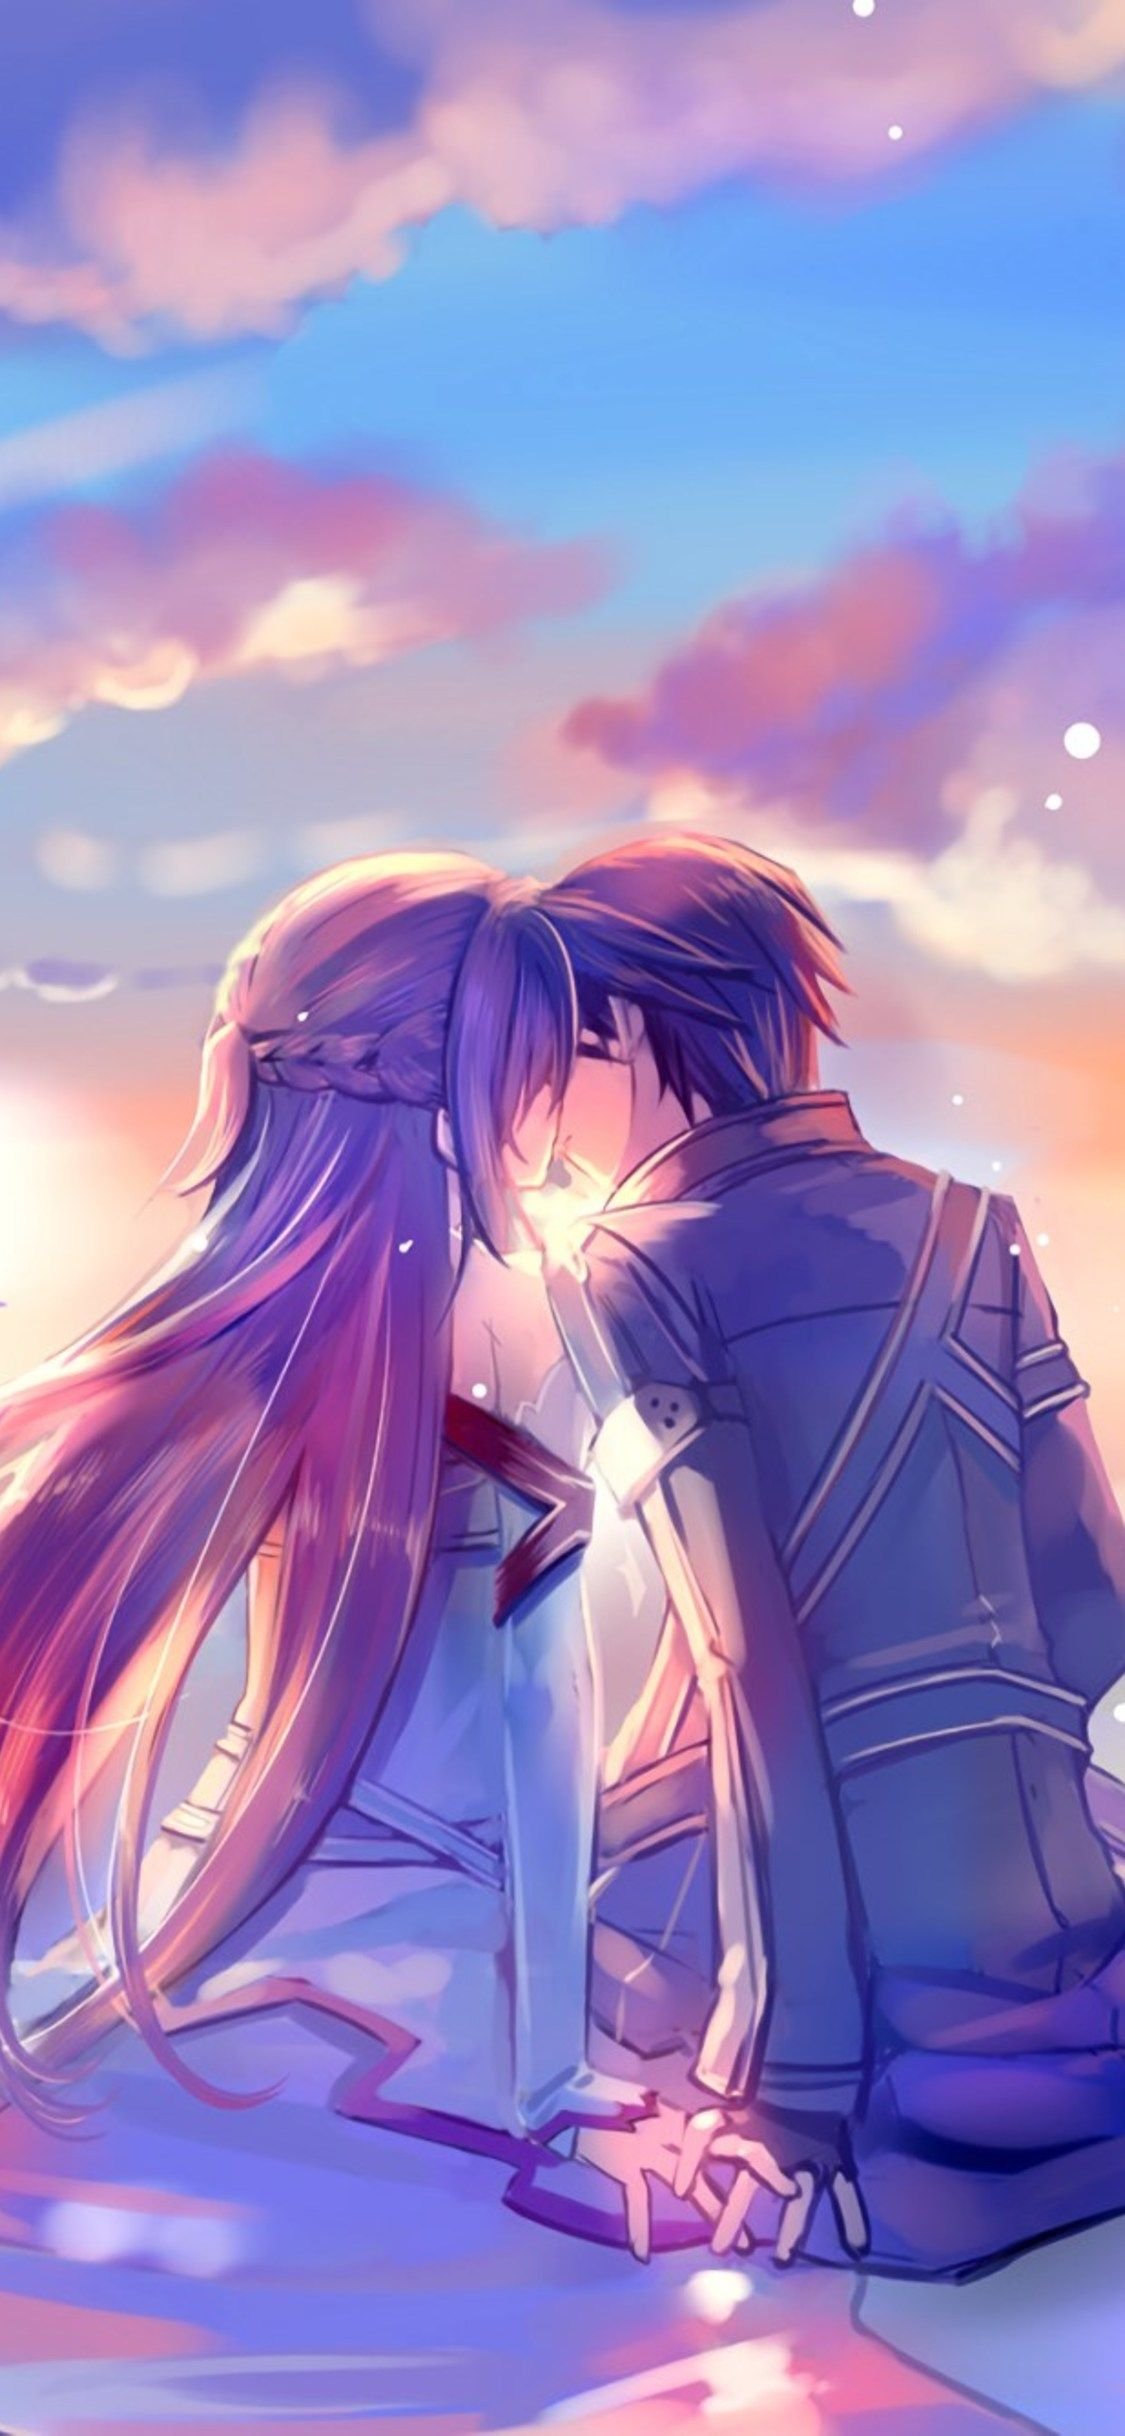 Romantic & Emotional Couples Anime Full HD Wallpapers